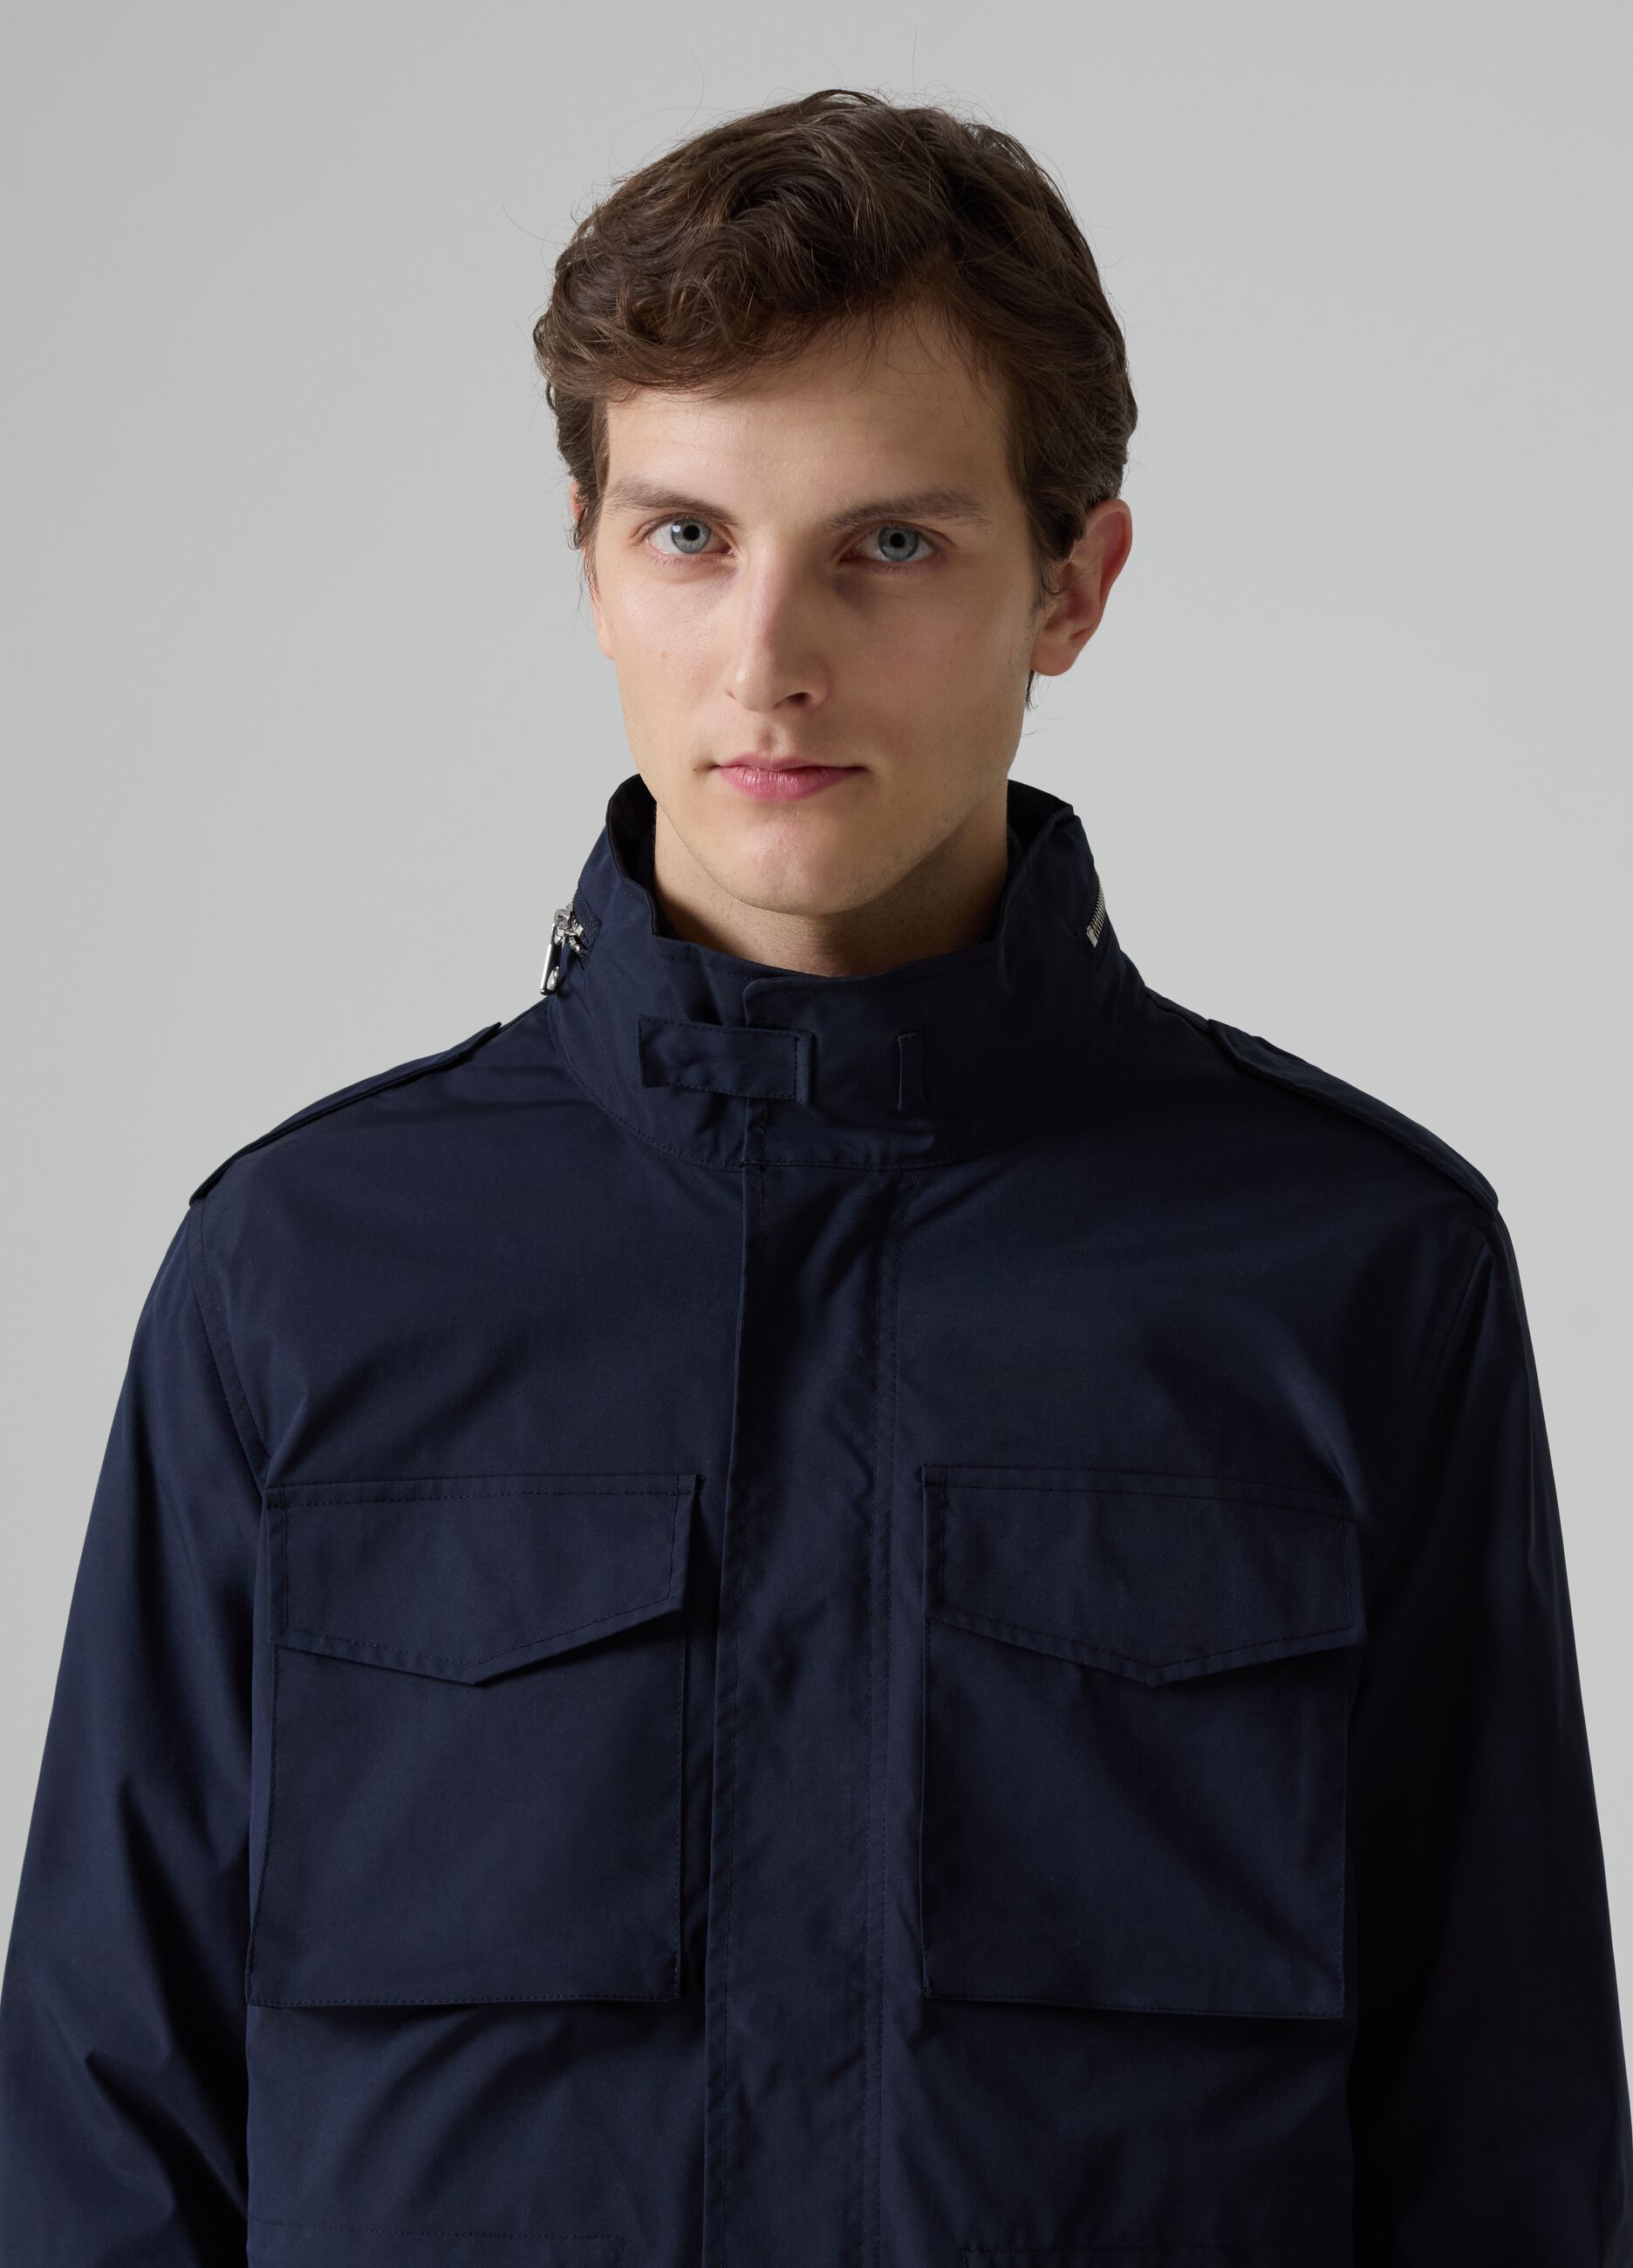 Short jacket with high neck